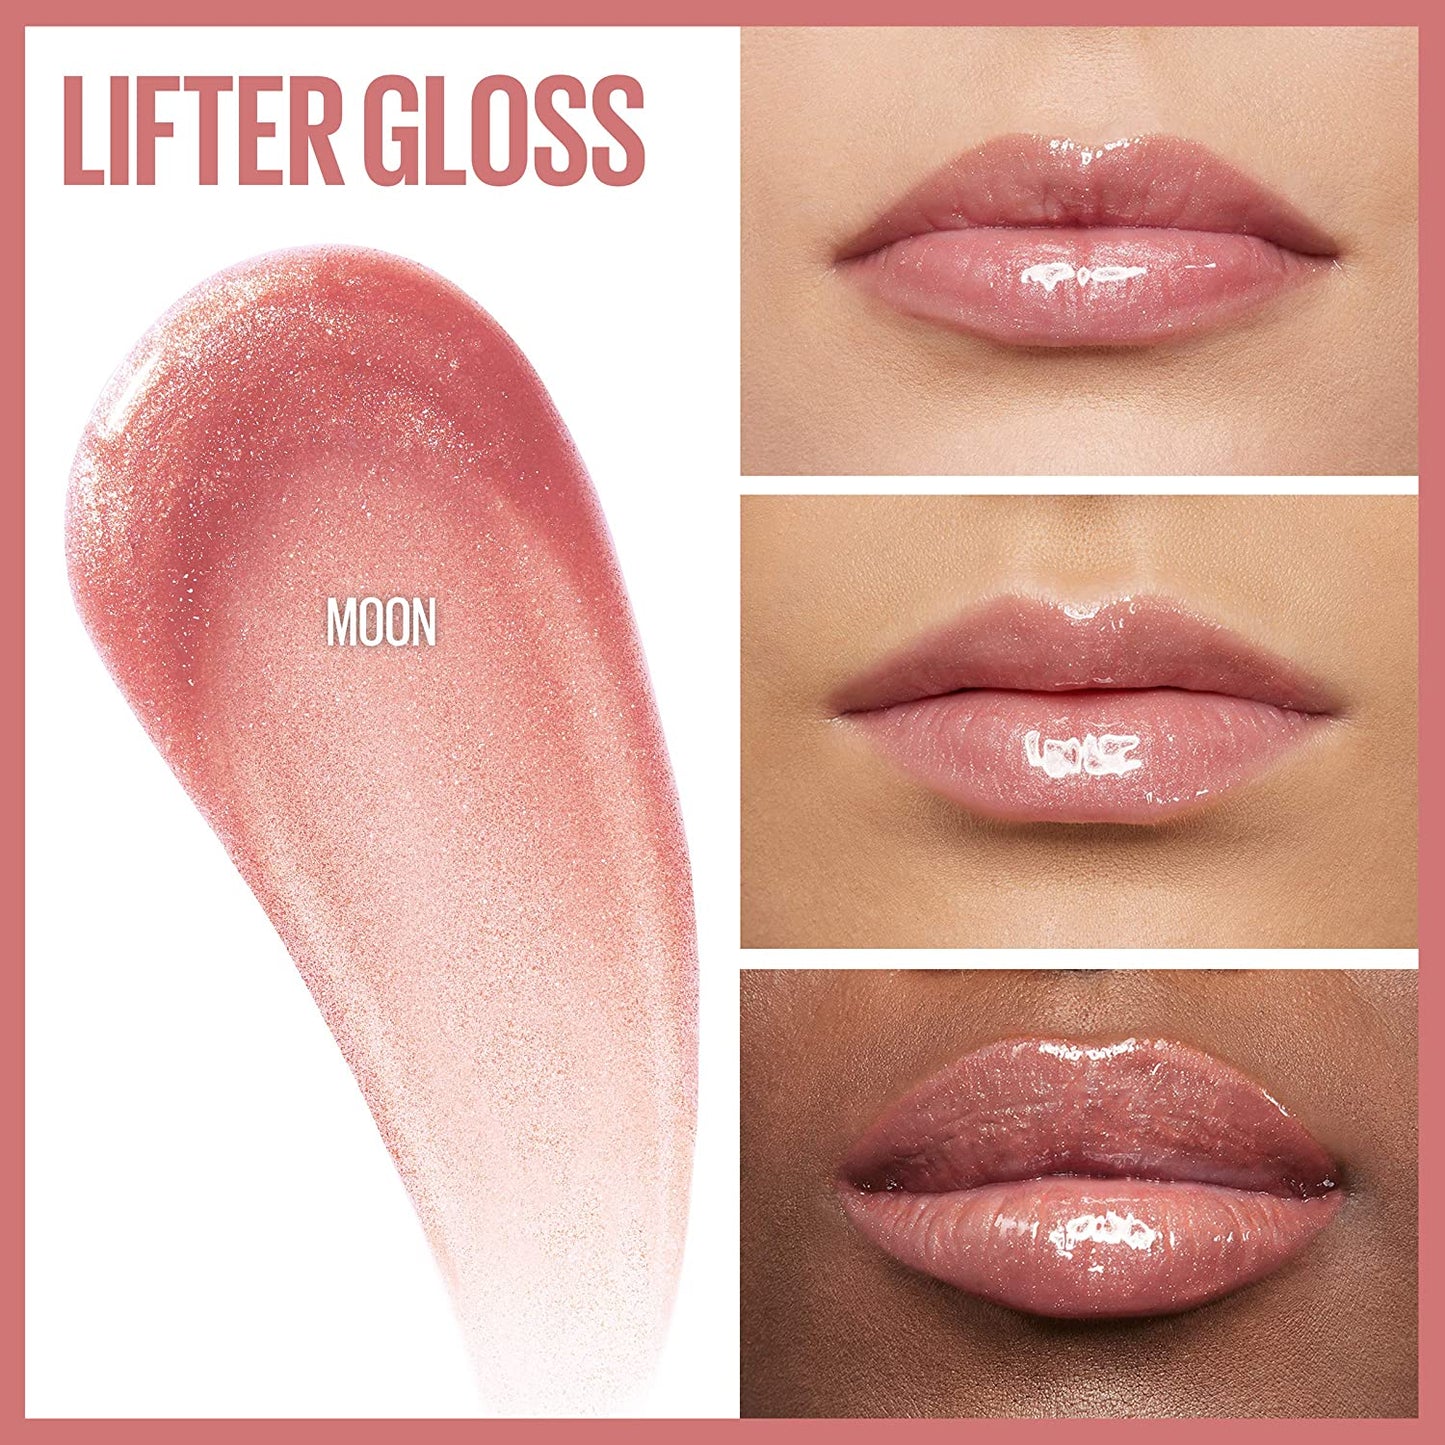 LIFTER GLOSS LIP GLOSS MAKEUP WITH HYALURONIC ACID- Choose a shade